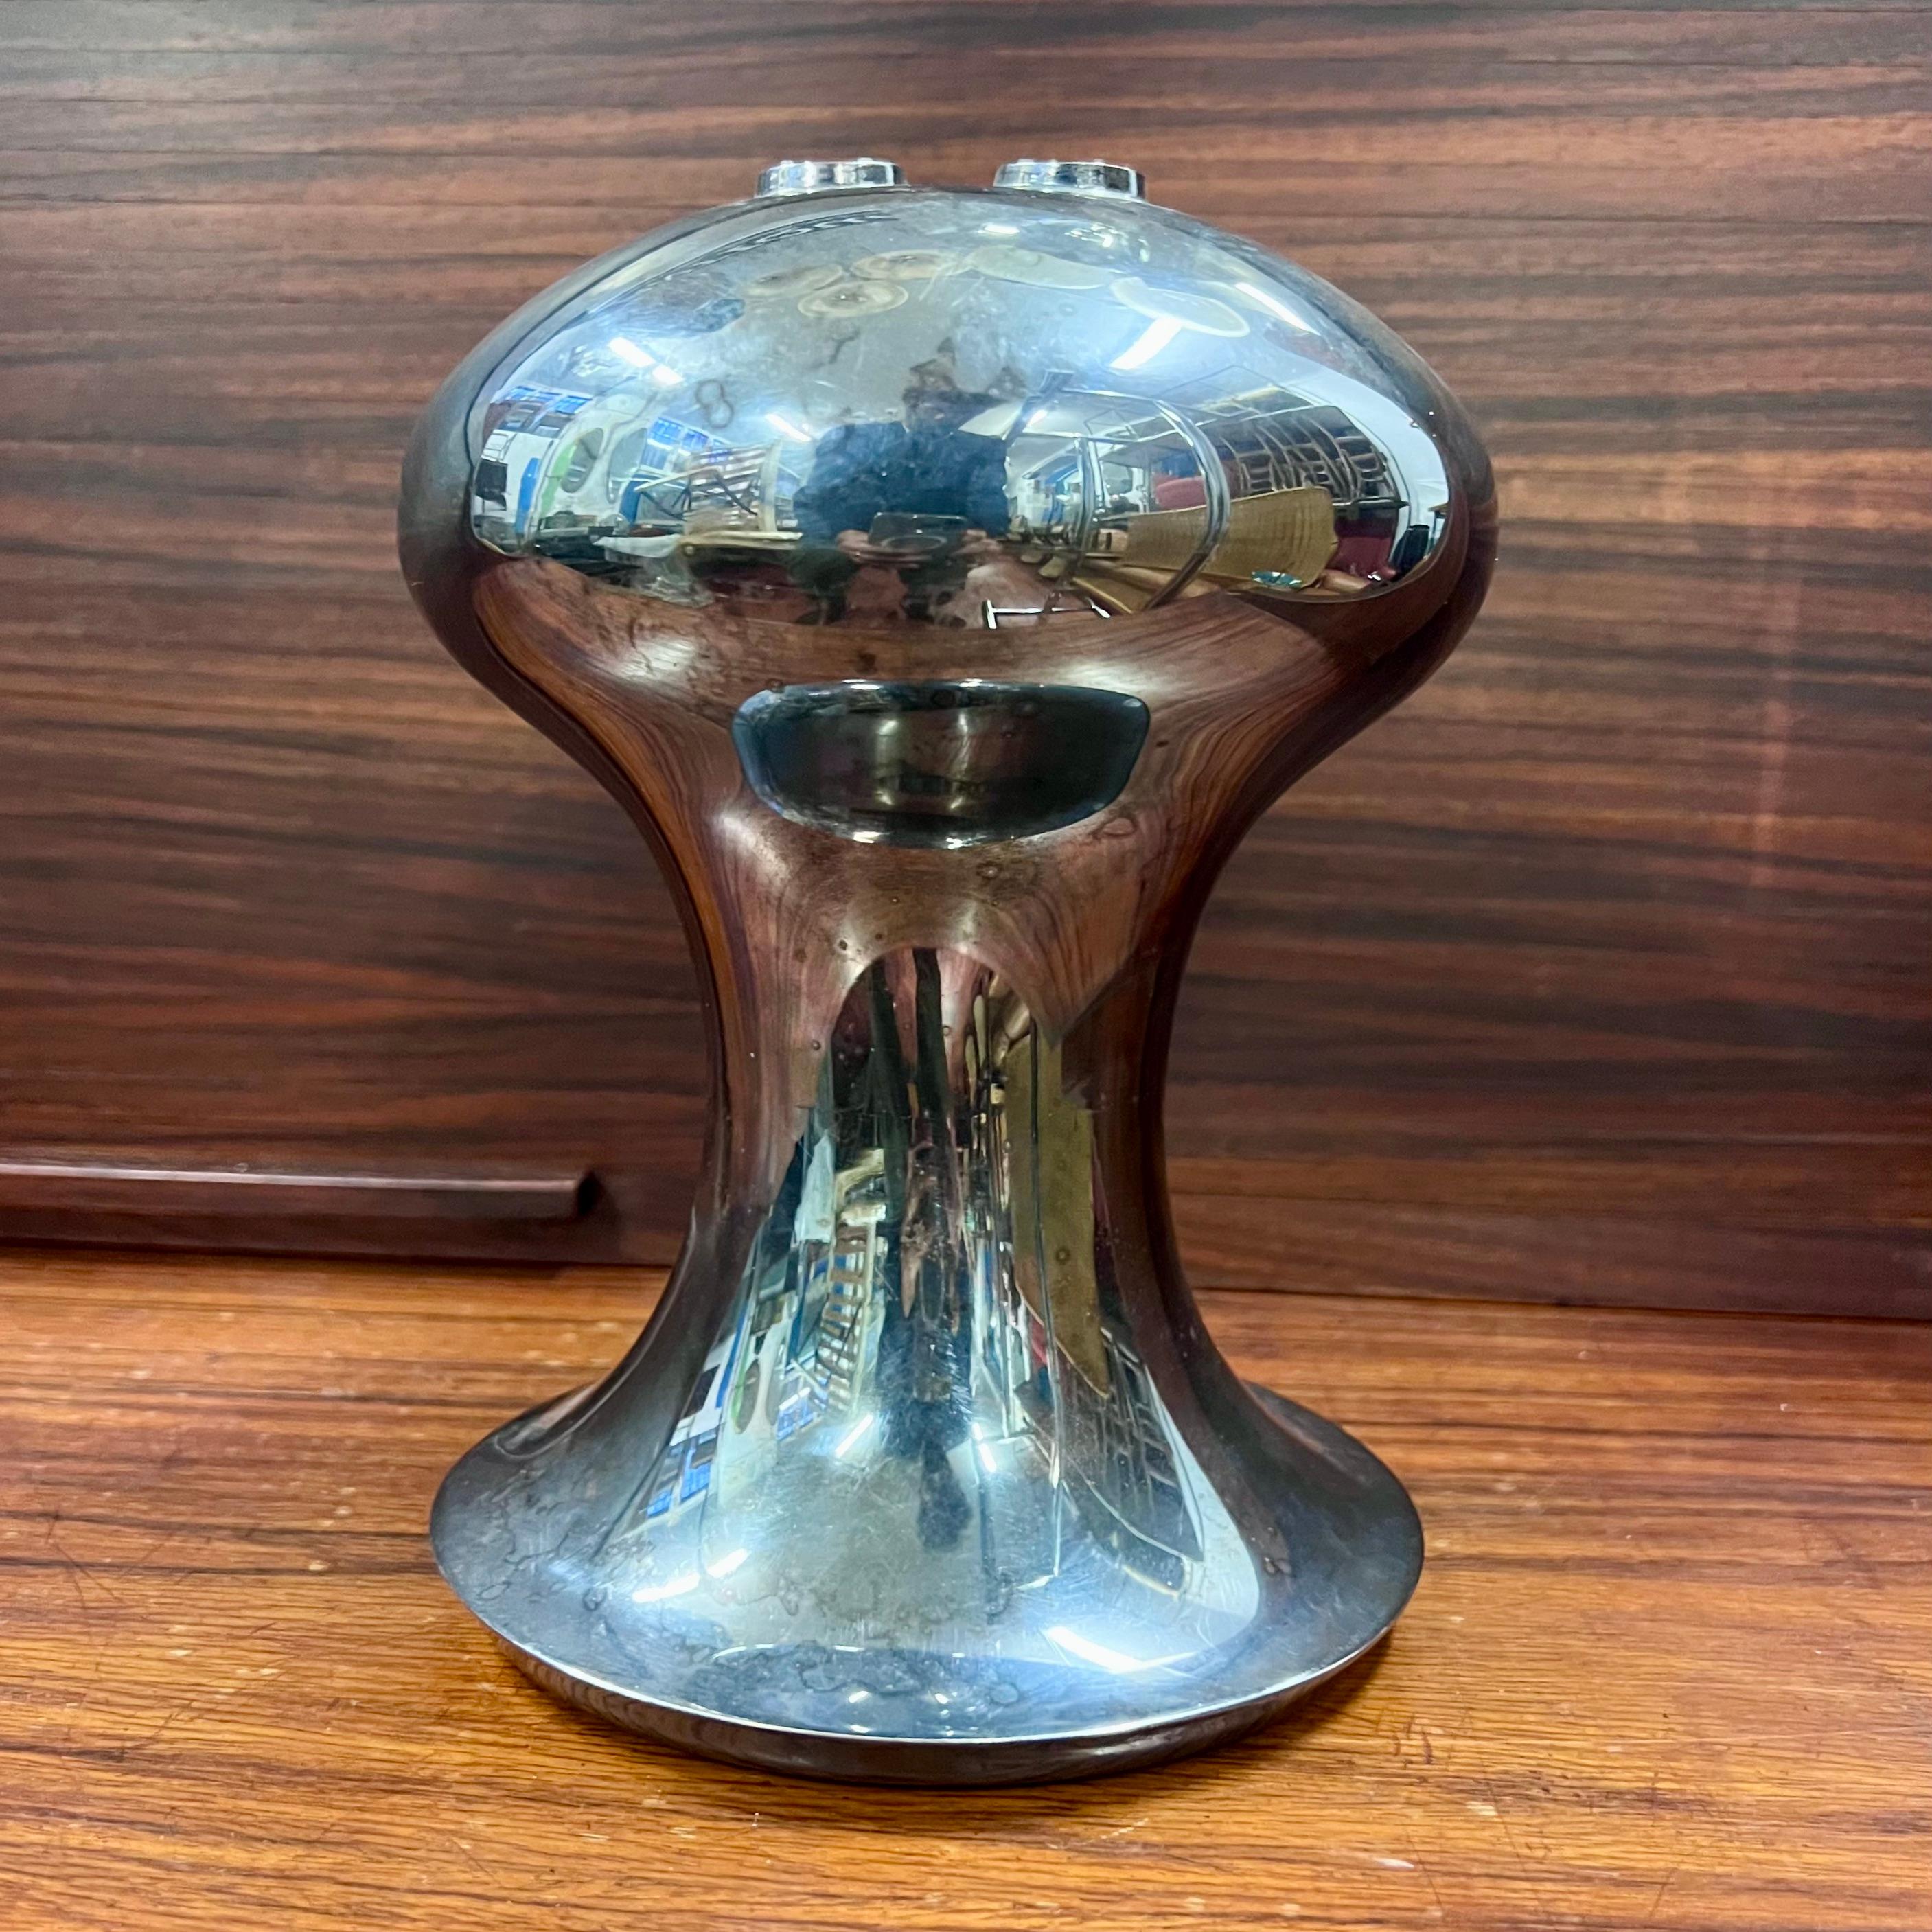 Rare silvered metal vase with a distinctive shape, designed for Sabattini Argenterie, by Lino Sabattini, in the 1970s.
In fact, the shape brings back the Space Age style, recalling a Space Base from the collective imagination. 
It bears the brand